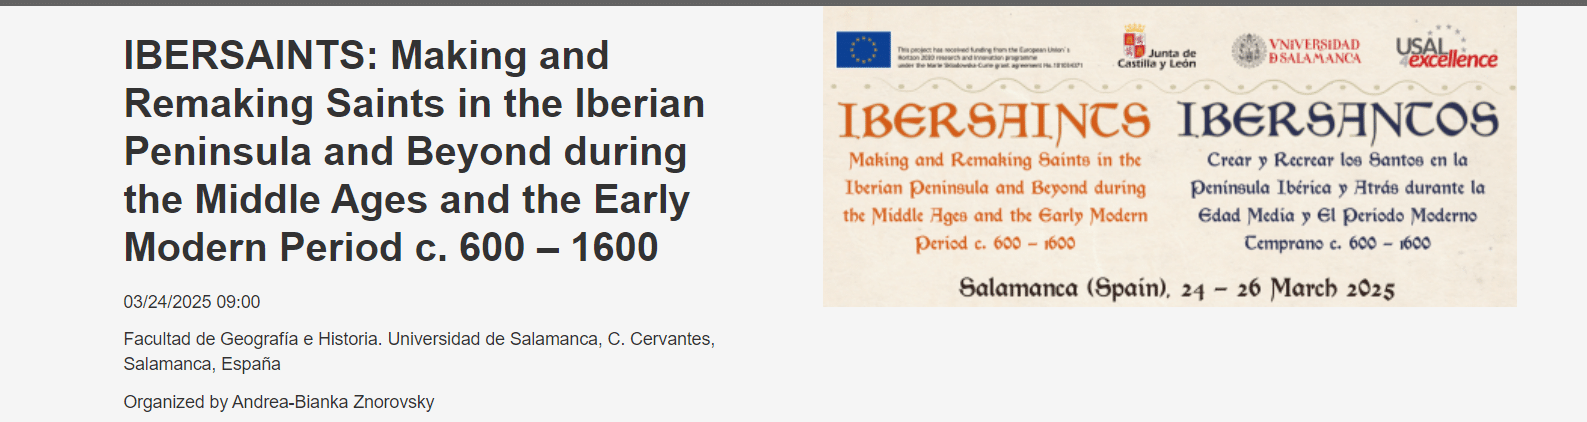 IBERSAINTS: Making and Remaking Saints in the Iberian Peninsula and Beyond during the Middle Ages and the Early Modern Period